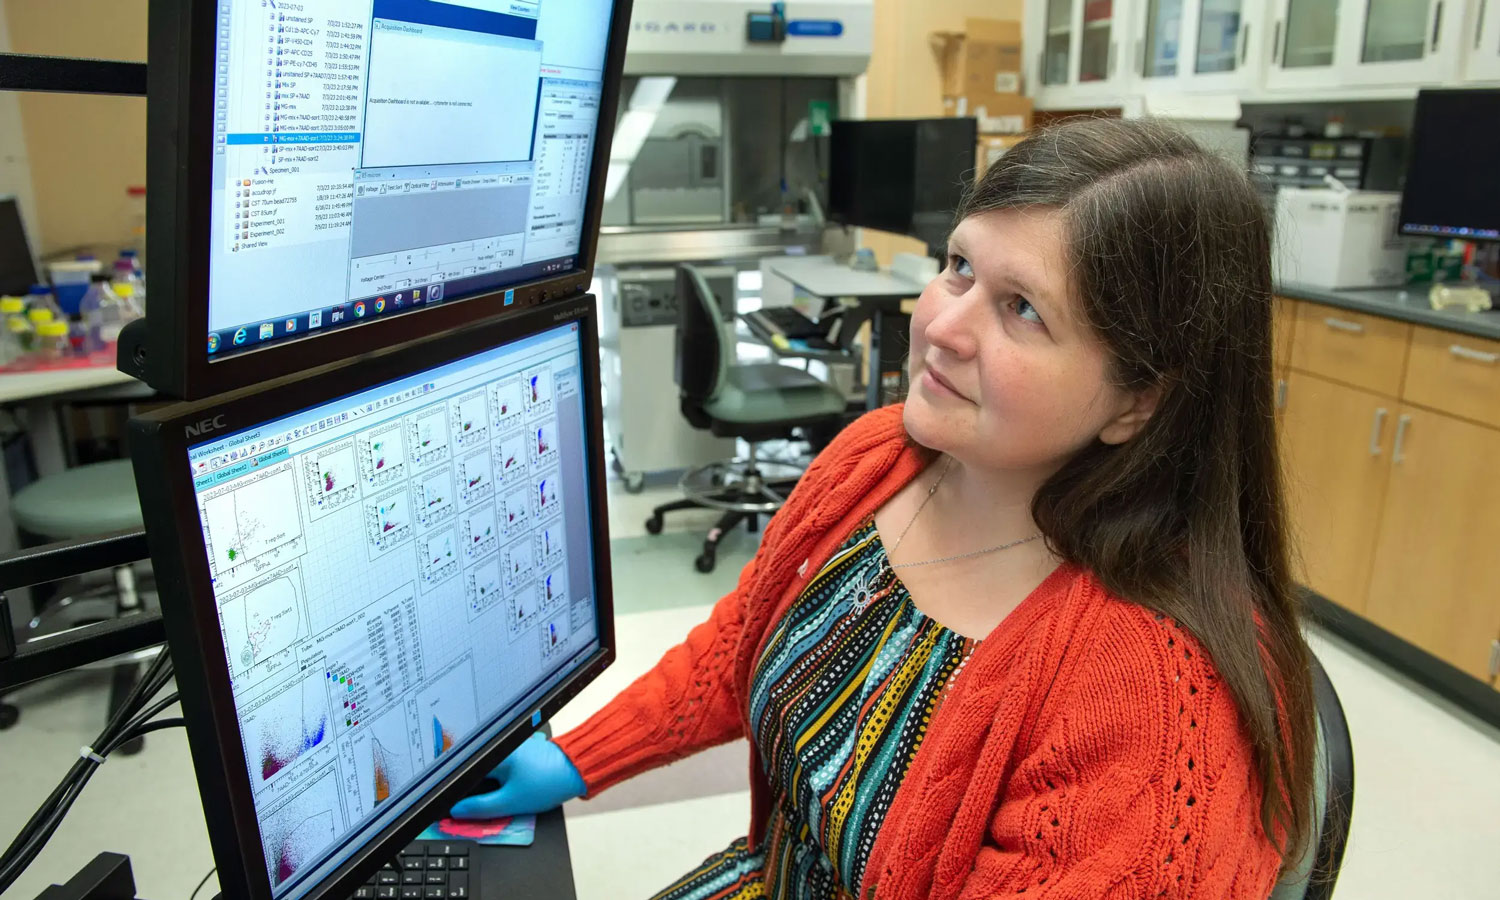 Rebecca Martin, Ph.D., looking at two computer screens